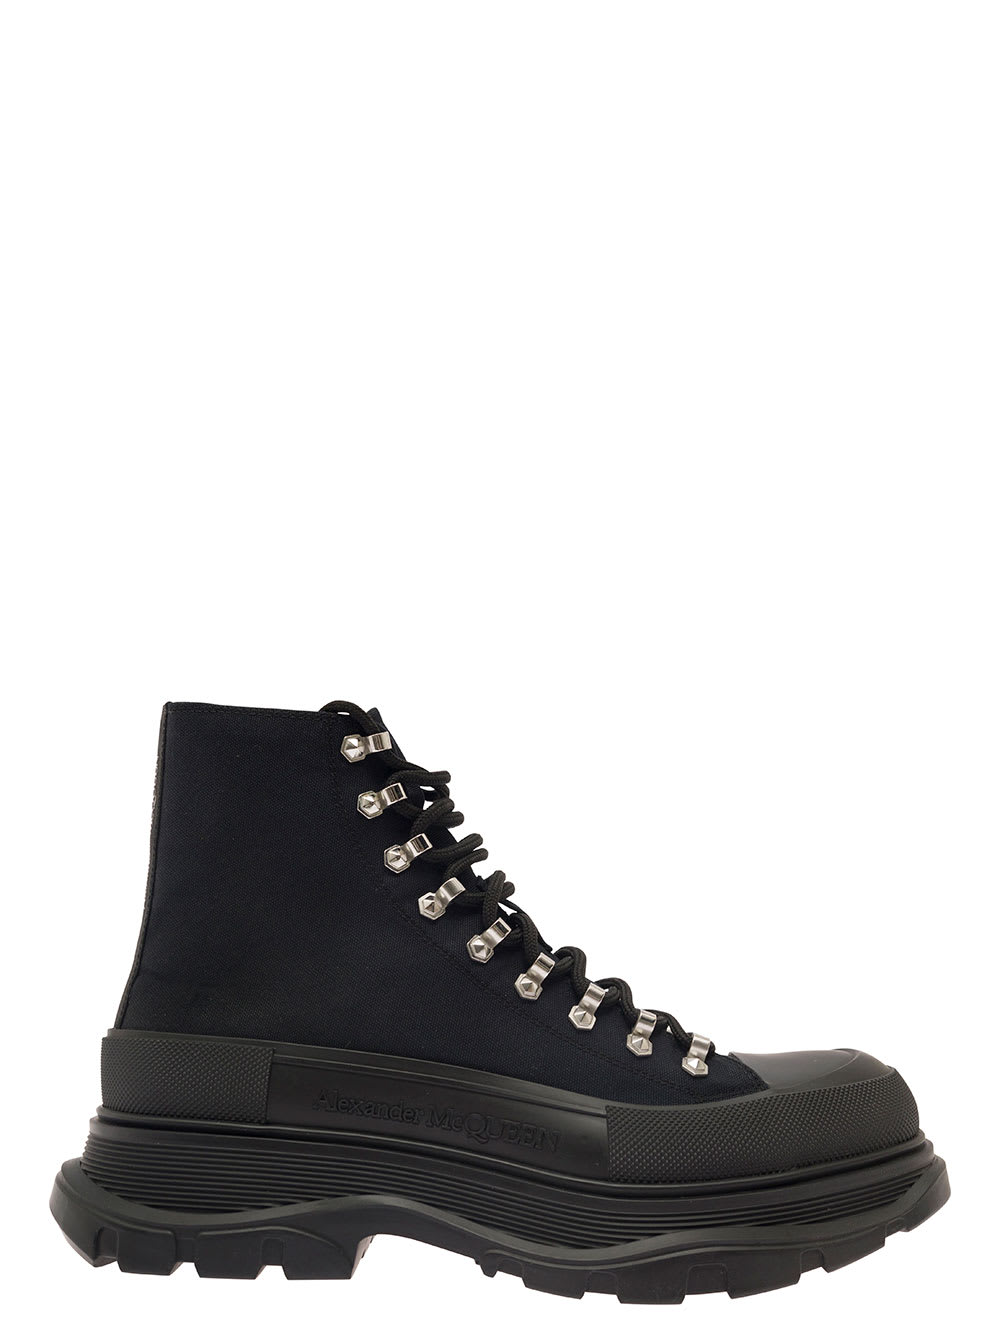 trade Slick Black Lace-up Boots With Thread Sole In Canvas Man